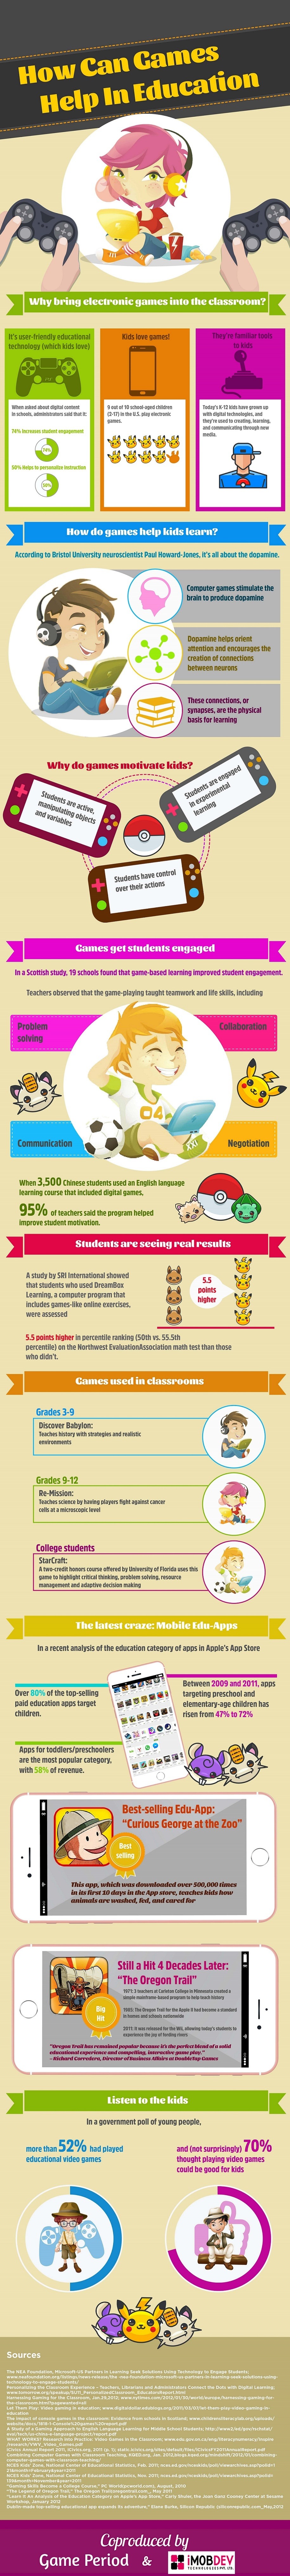 How Can Games Help in Education Infographic